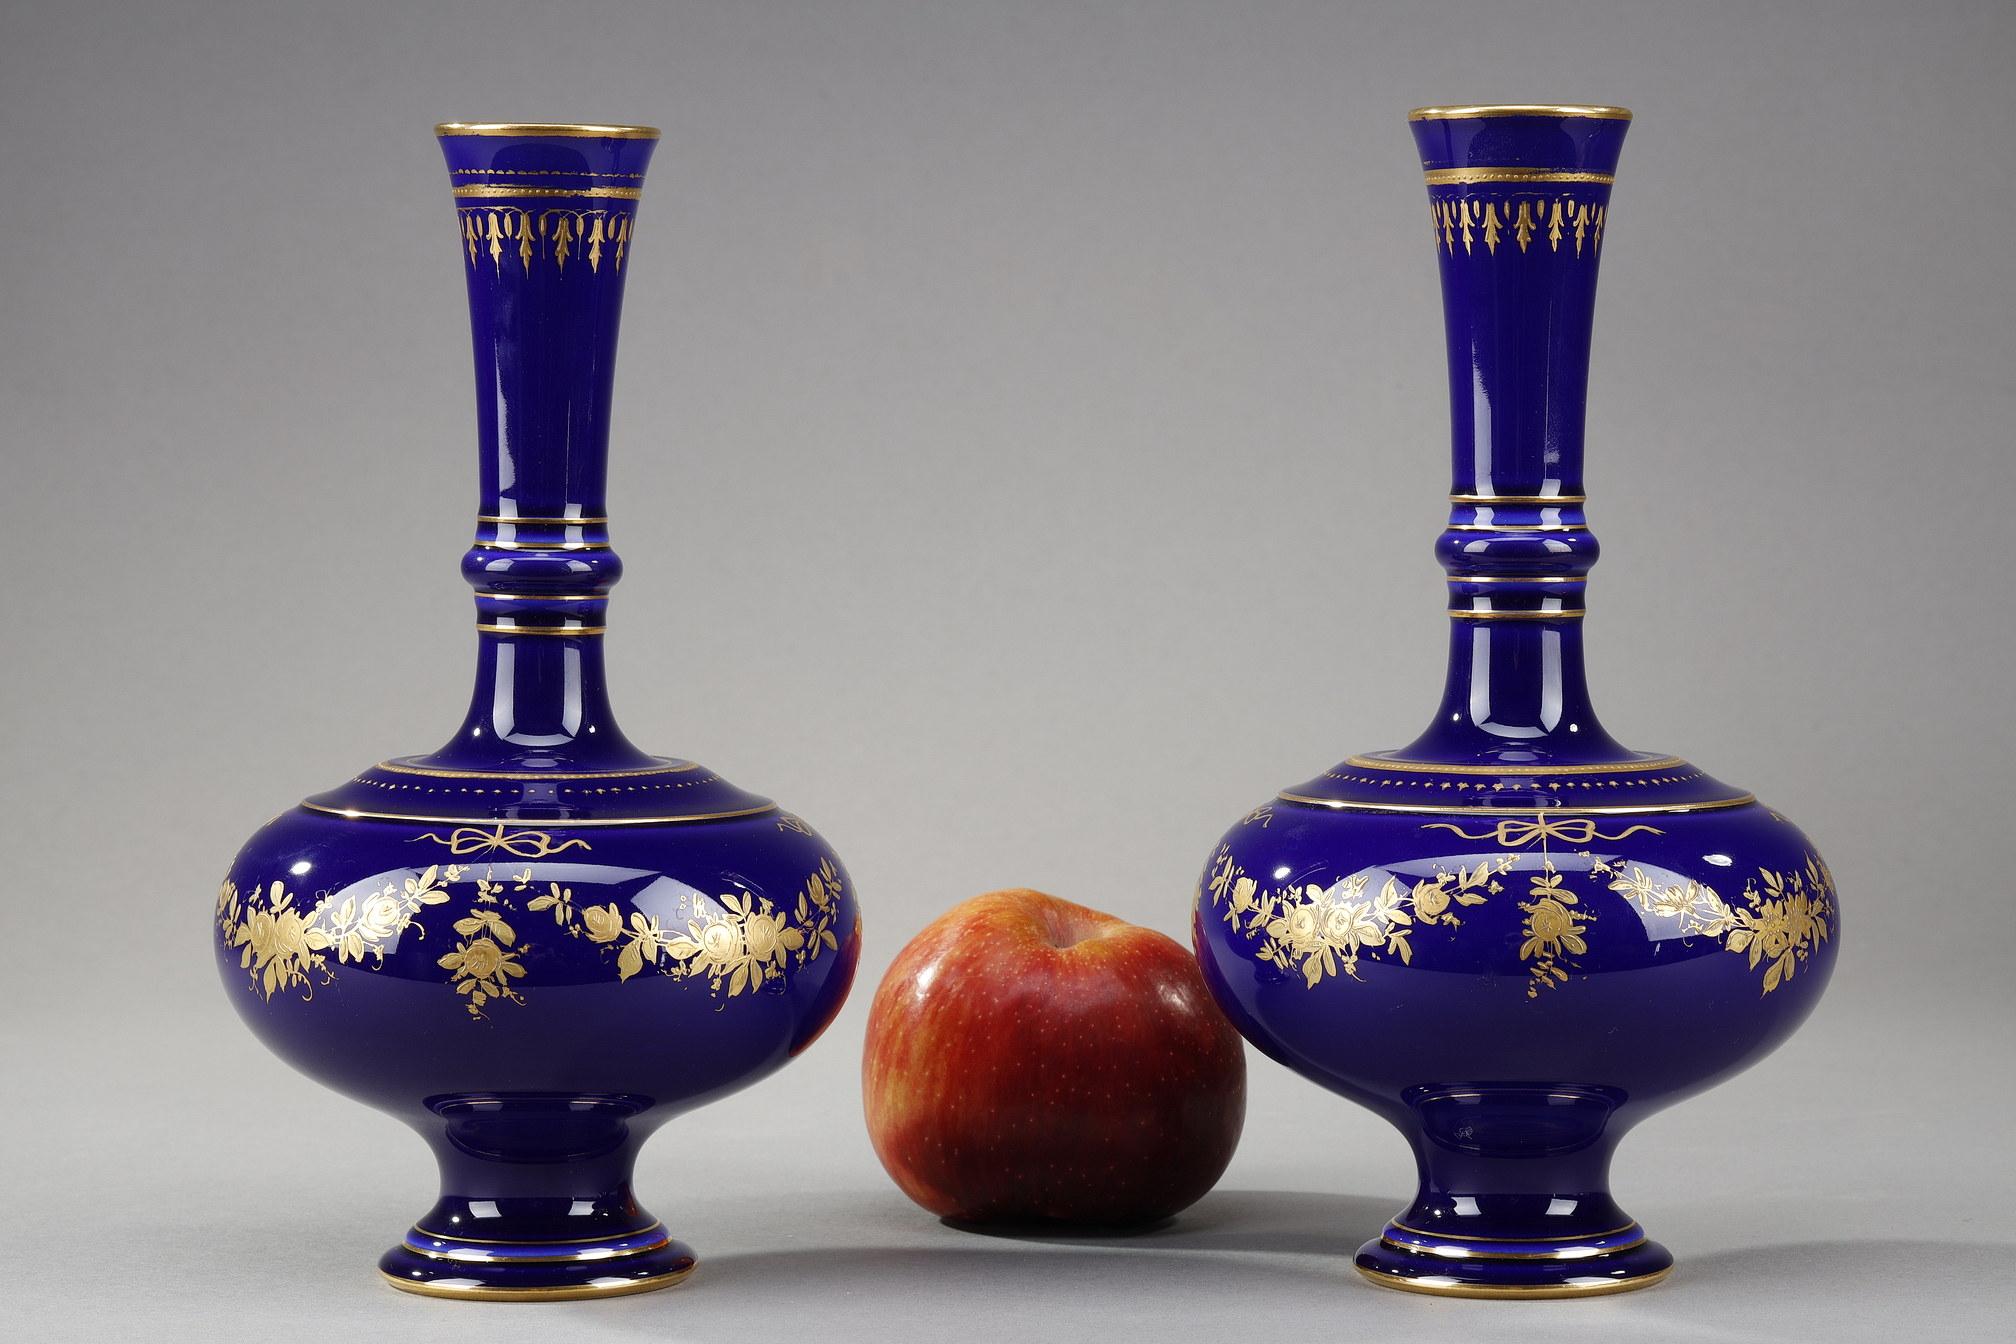 Pair of small vases with gilded decoration on a blue porcelain background. They have long necks with golden nets. Their bodies have a golden decoration is Louis XV style with garlands of flowers and decorative knot. It is a production of the